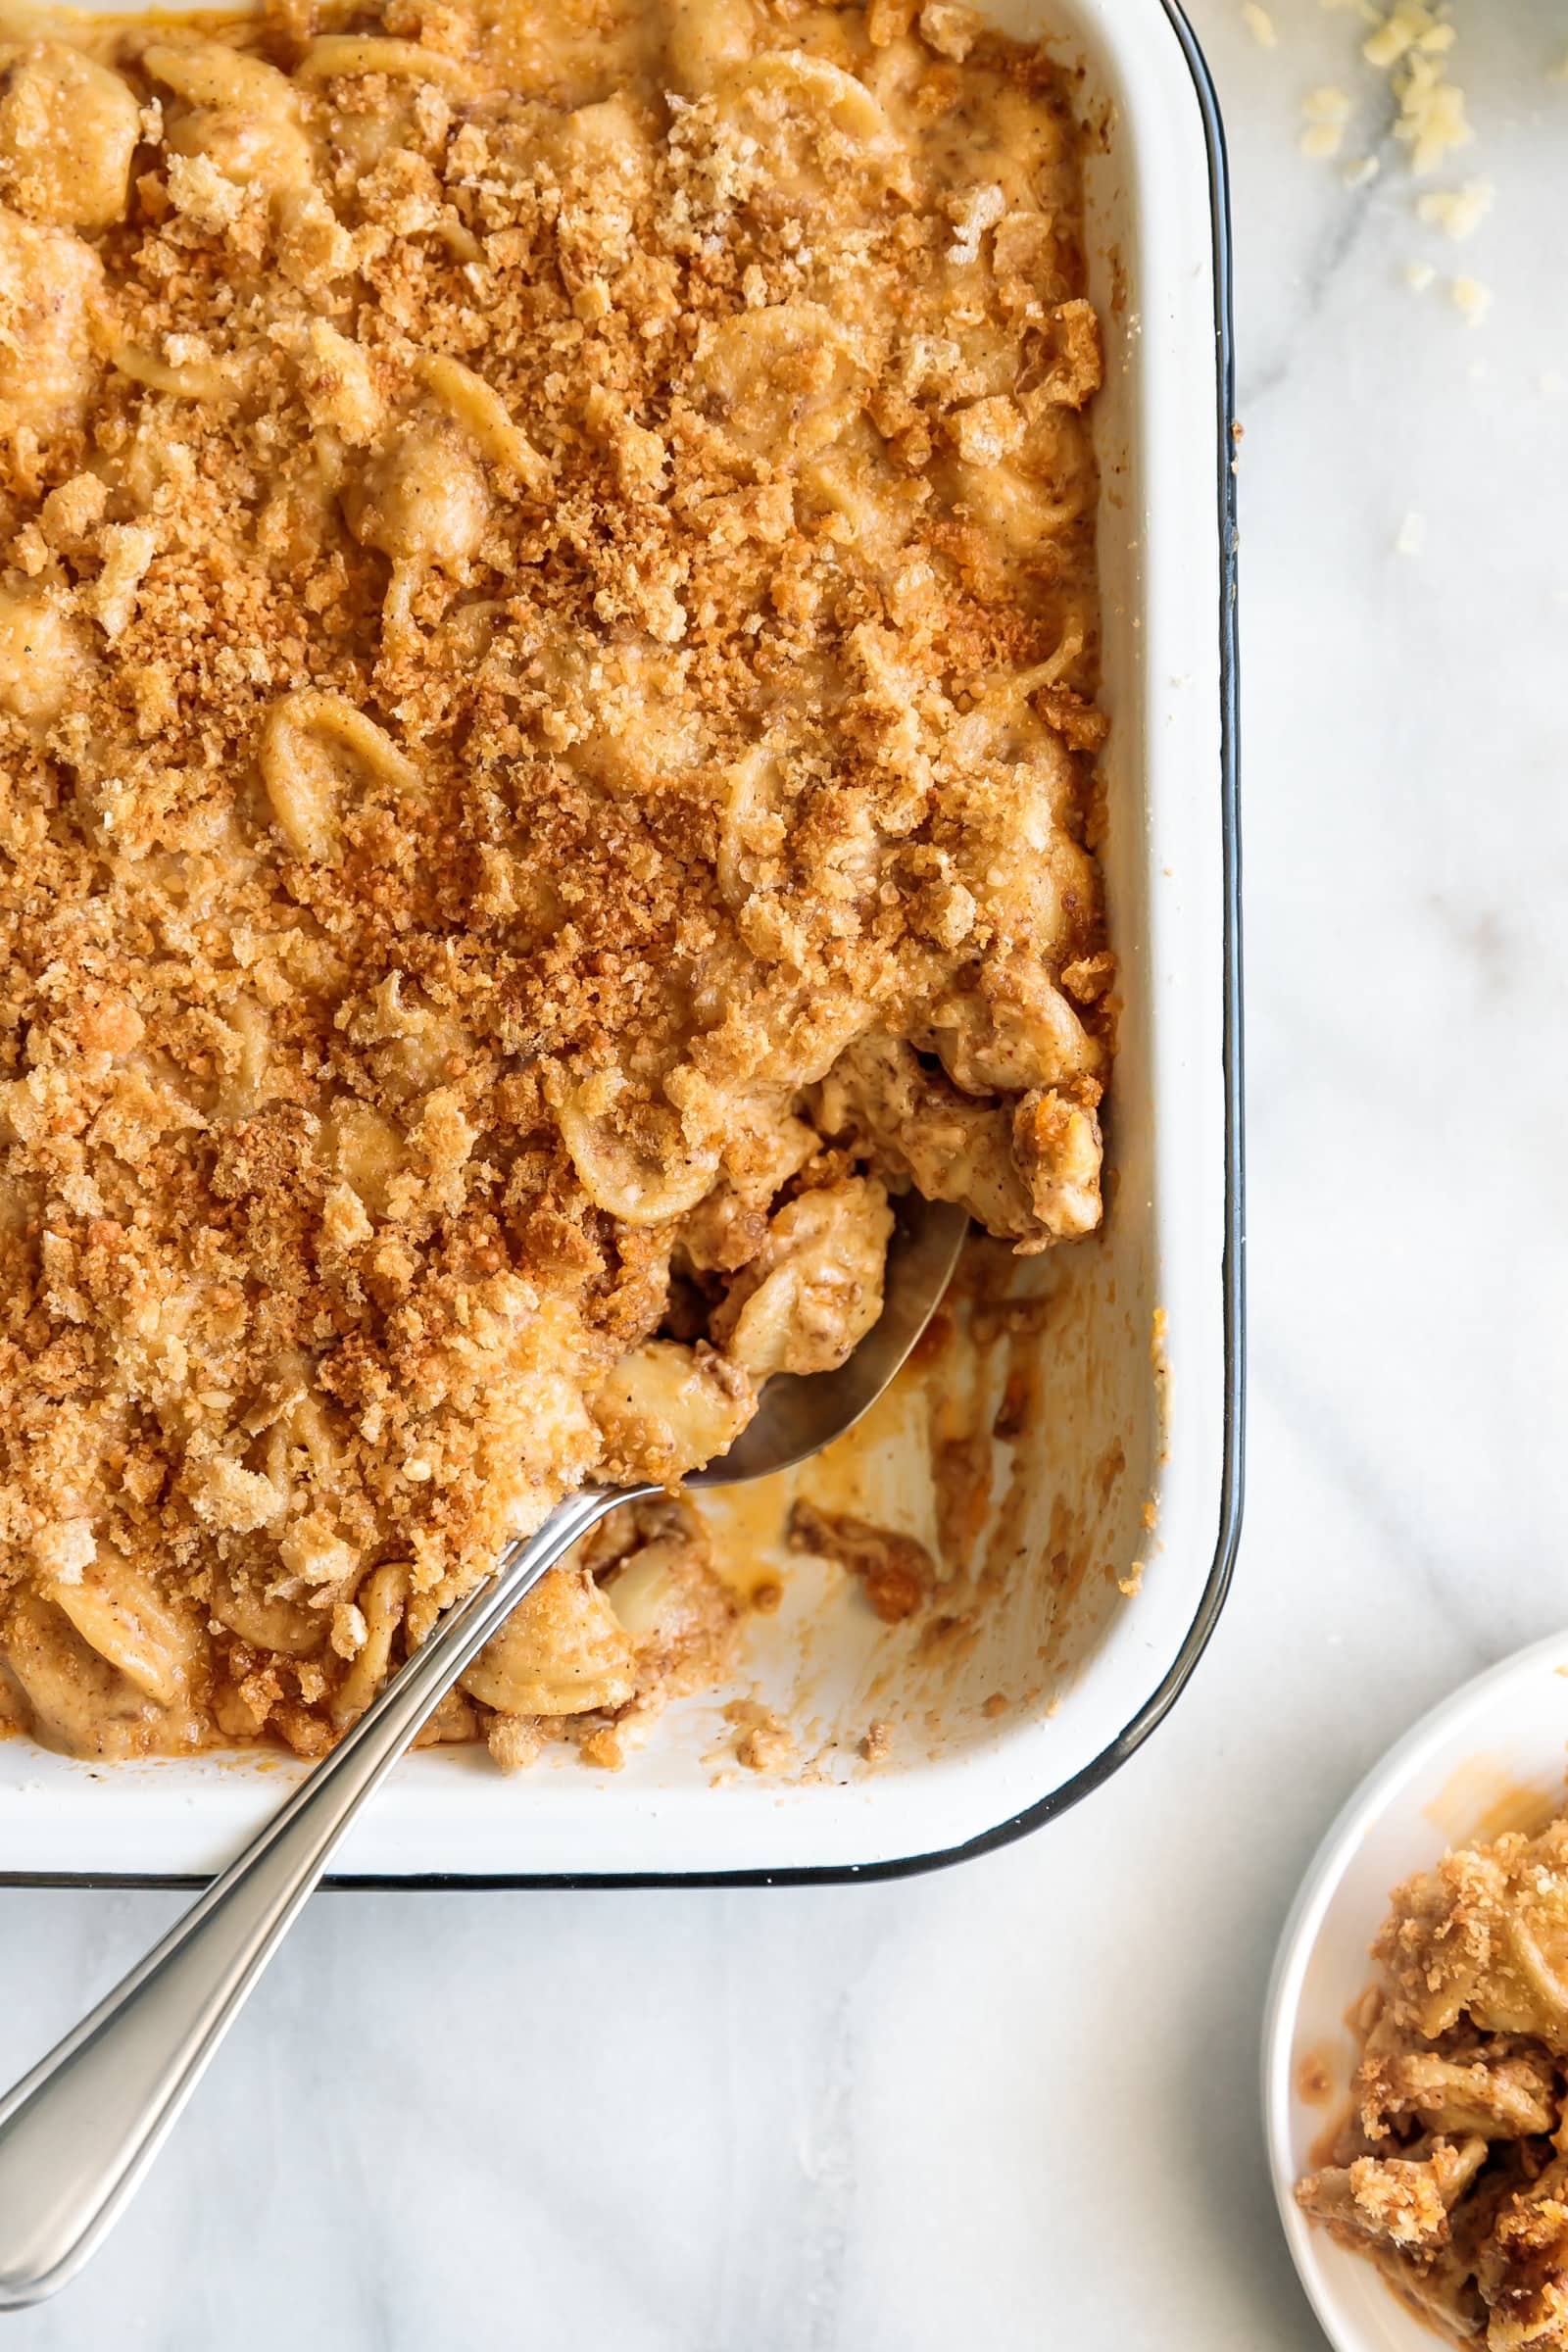 Creamy mac and cheese mixed with crumbled Mexican chorizo and a cheesy chicharrón (pork rind) crumble topping. A Latin twist on an American classic!